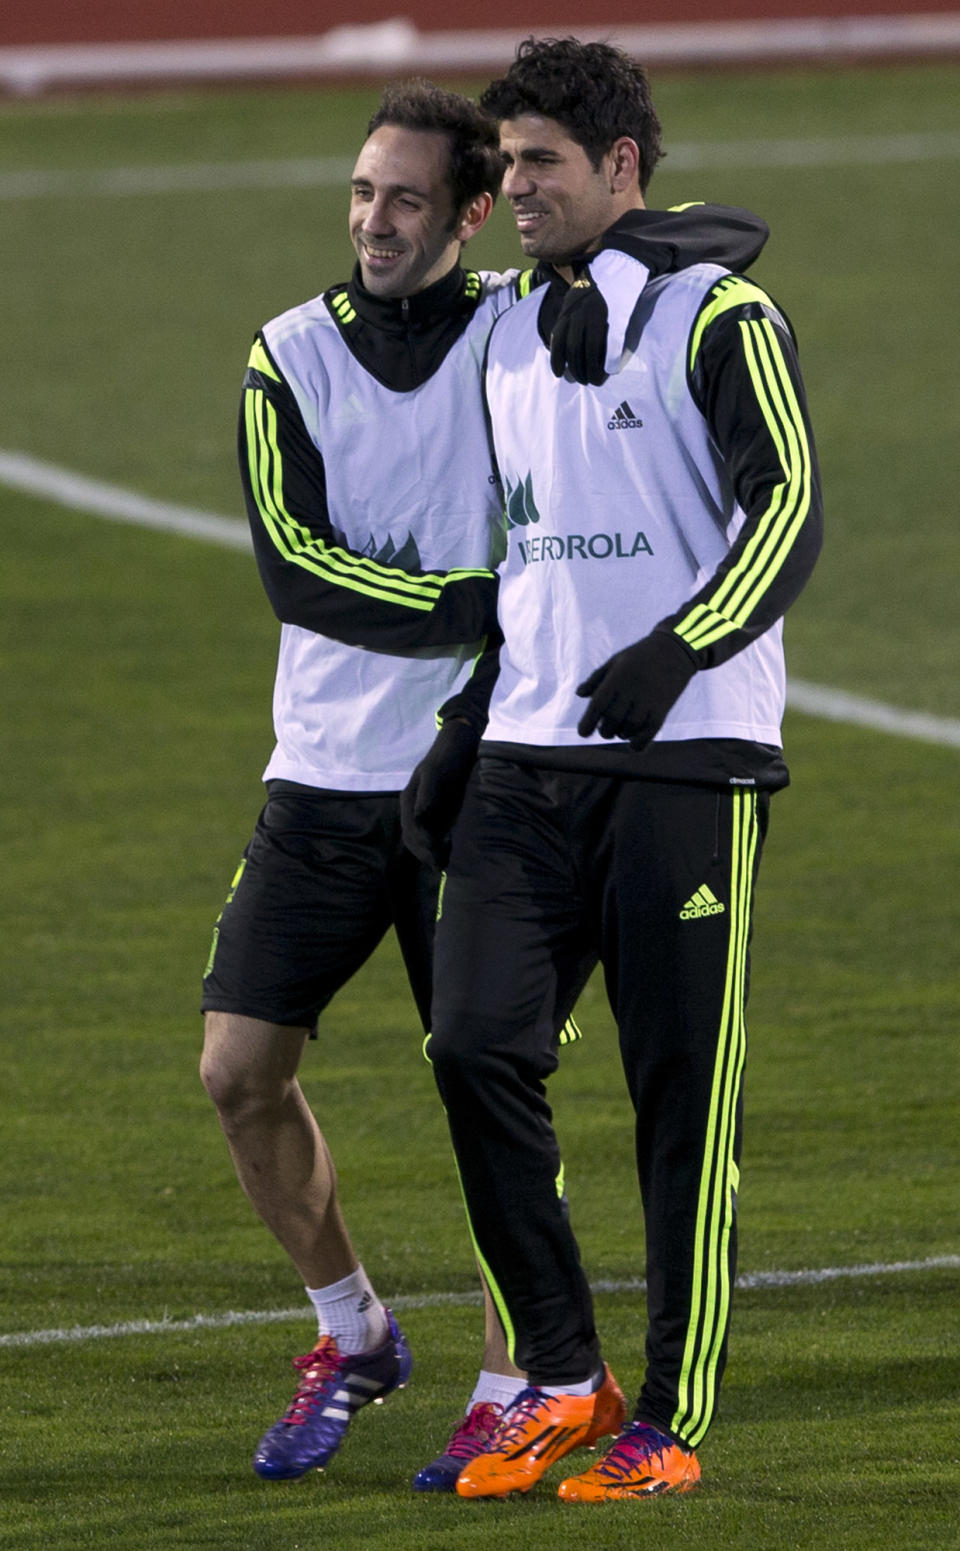 Spain's Diego Costa, right is hugged by Juanfran Torres during a training session in Madrid, Monday March 3, 2014. Spain will play Italy Wednesday in a friendly soccer match. (AP Photo/Paul White)